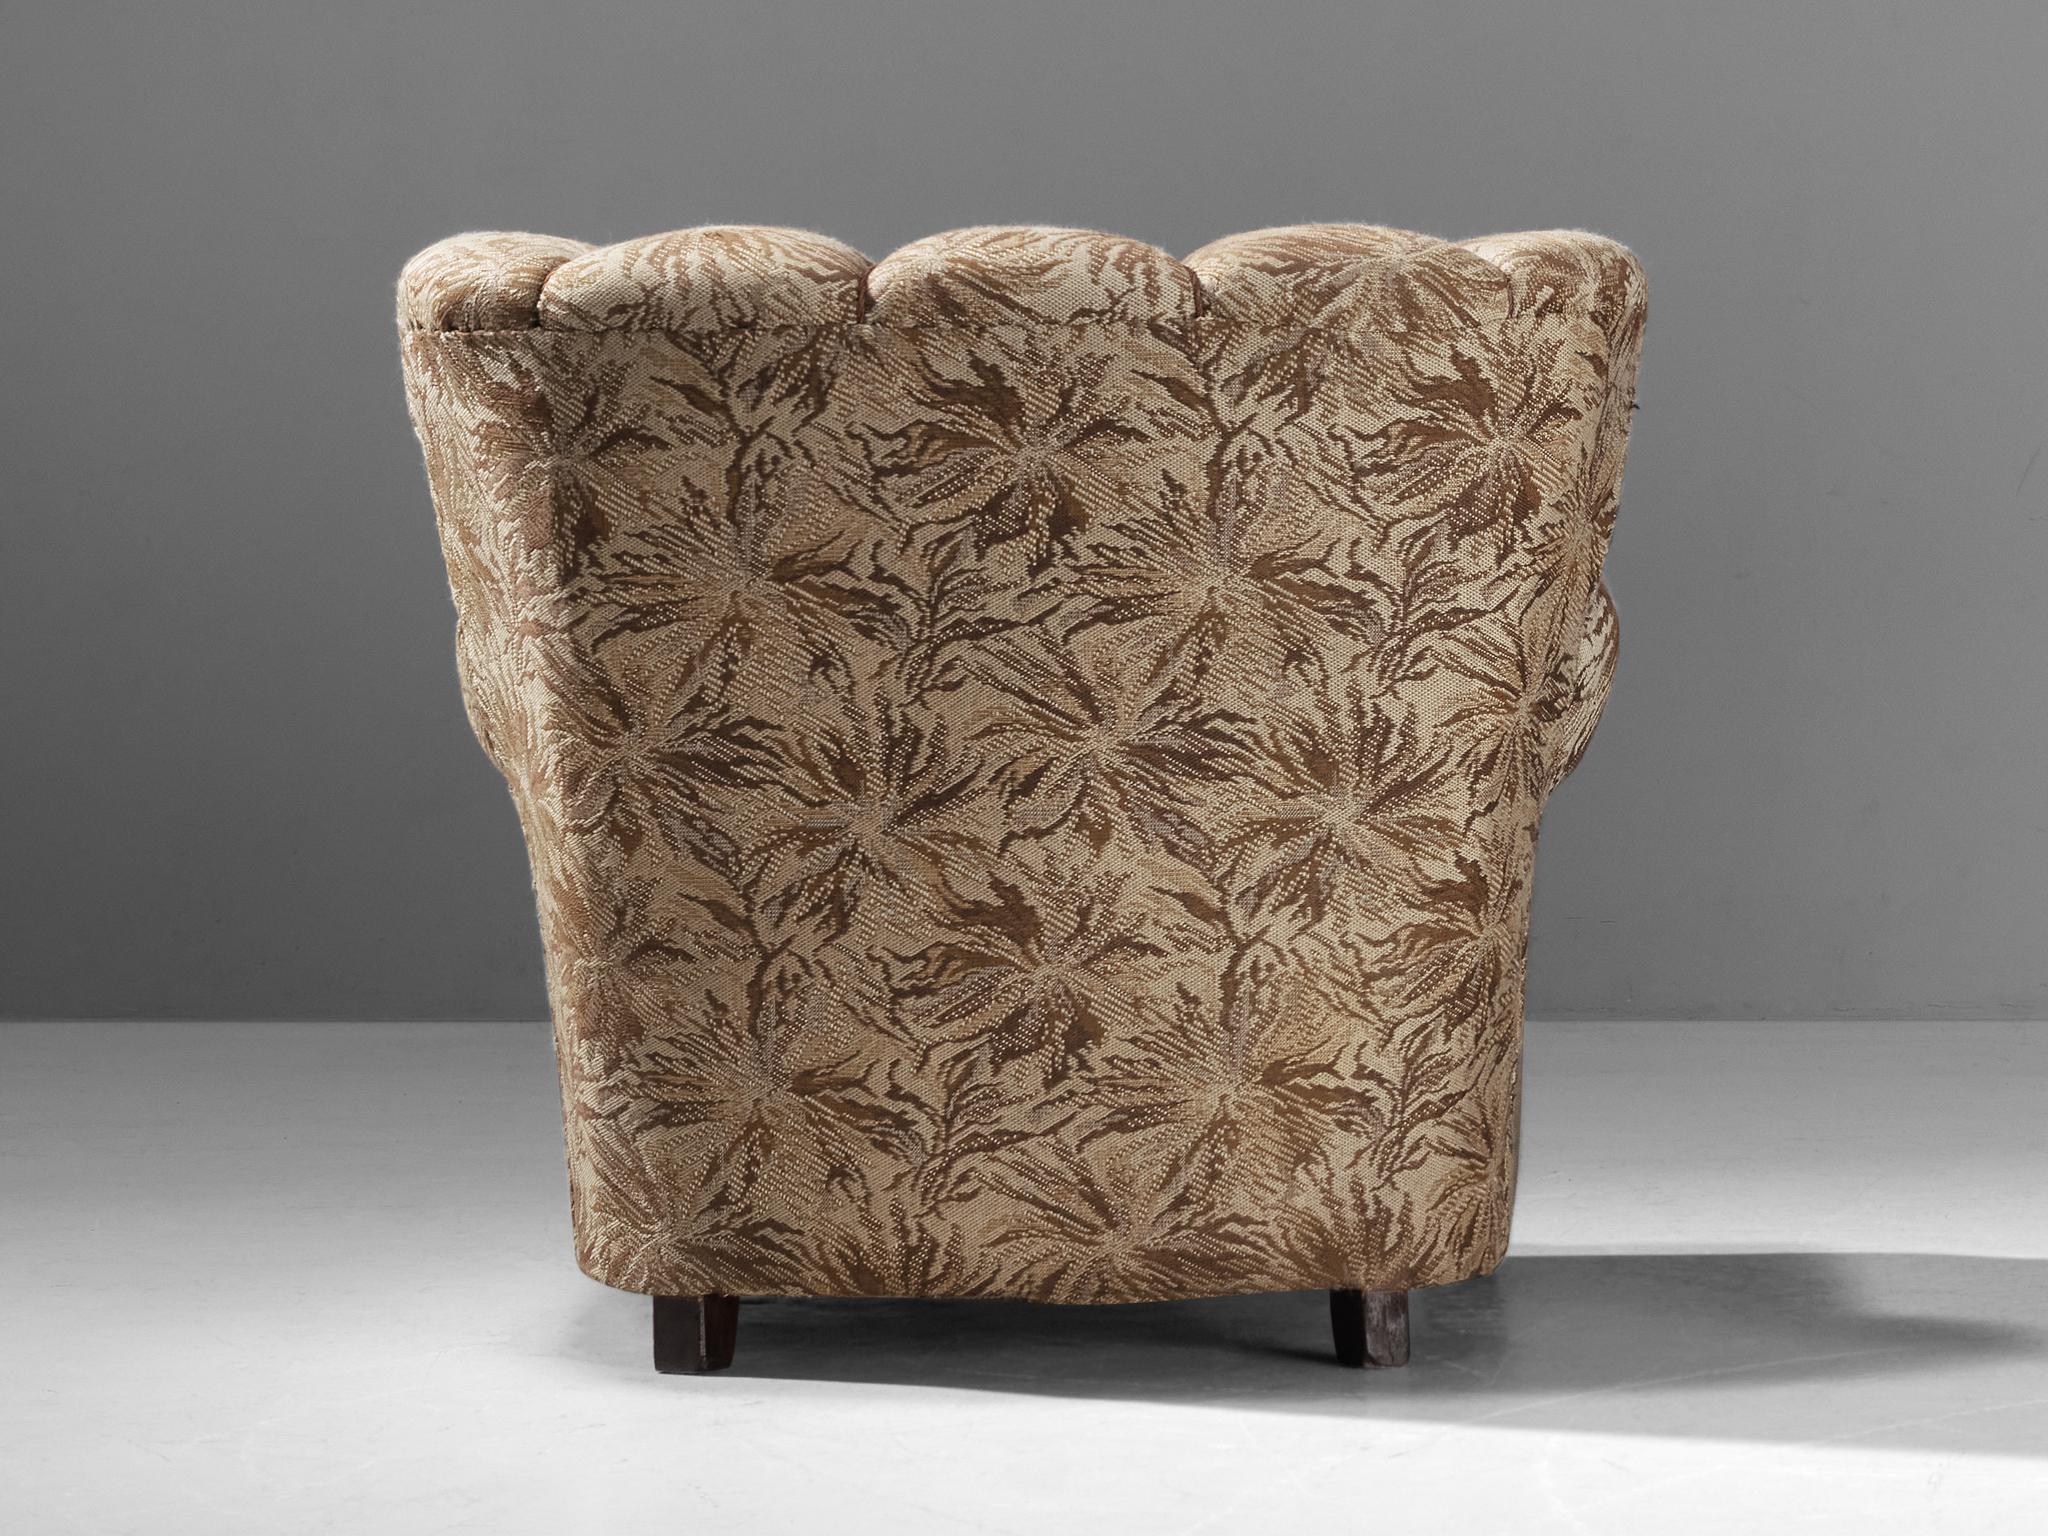 Lounge Chairs in Brown and Beige Floral Upholstery